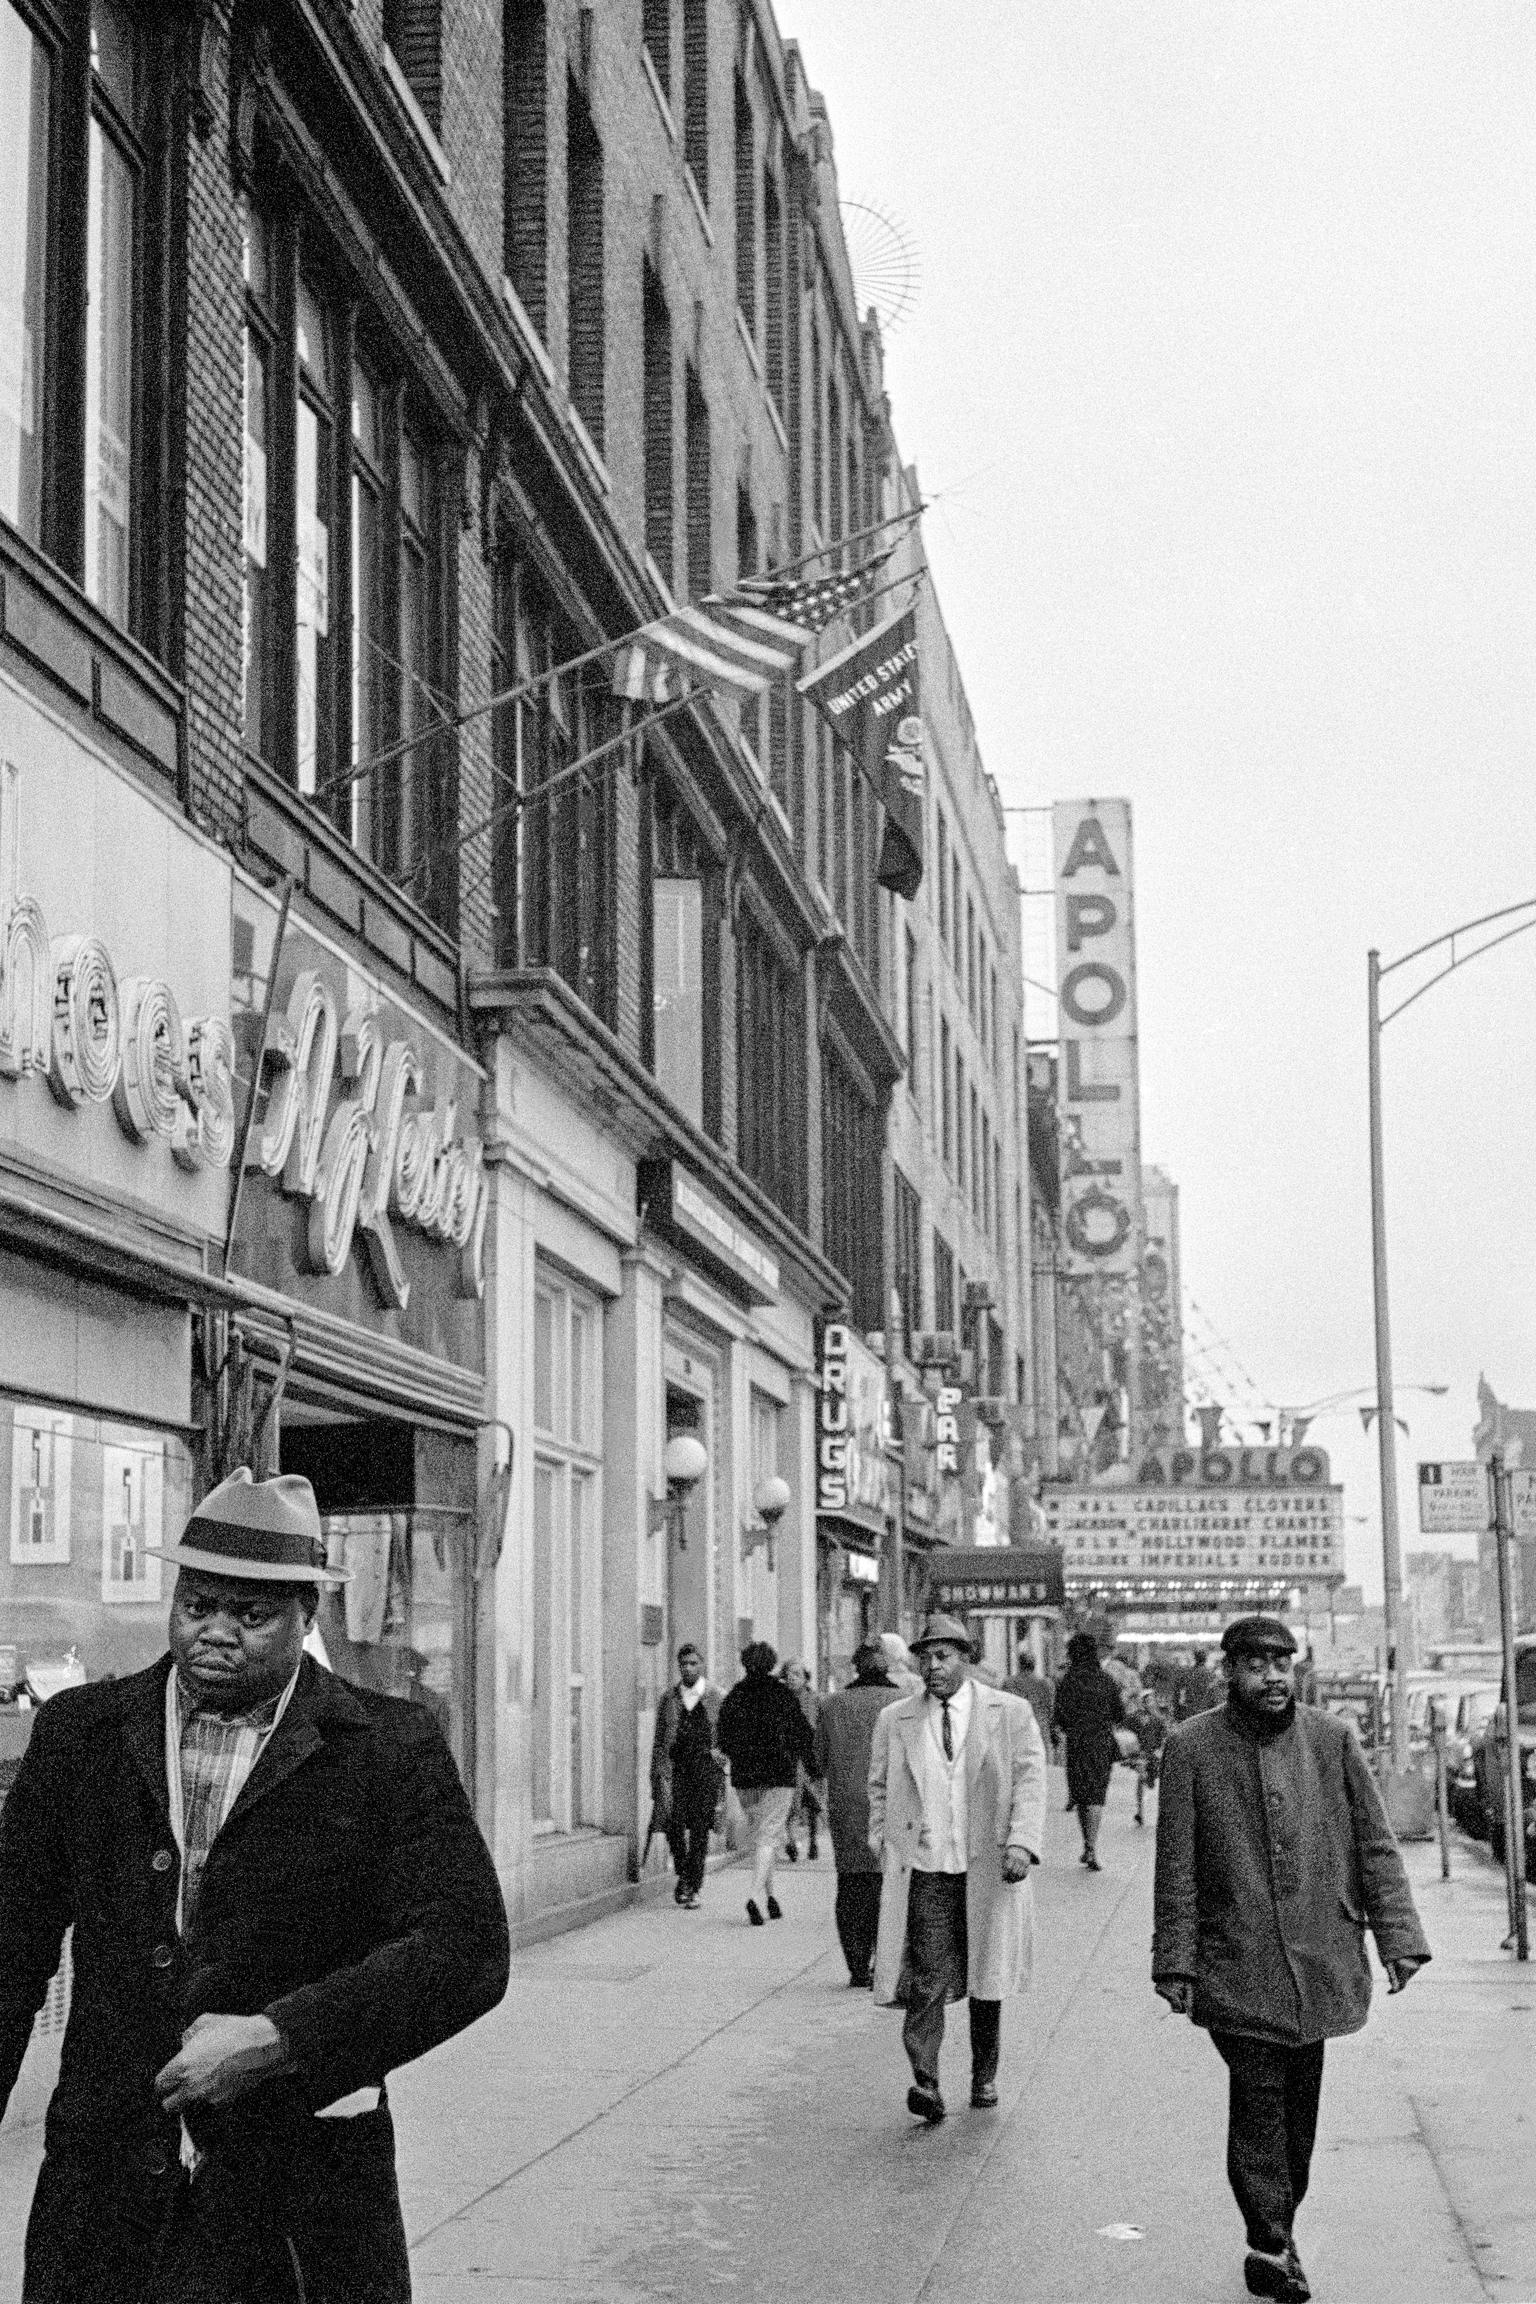 United States Army recruiting centre and the Apollo theatre. Harlem. New York USA